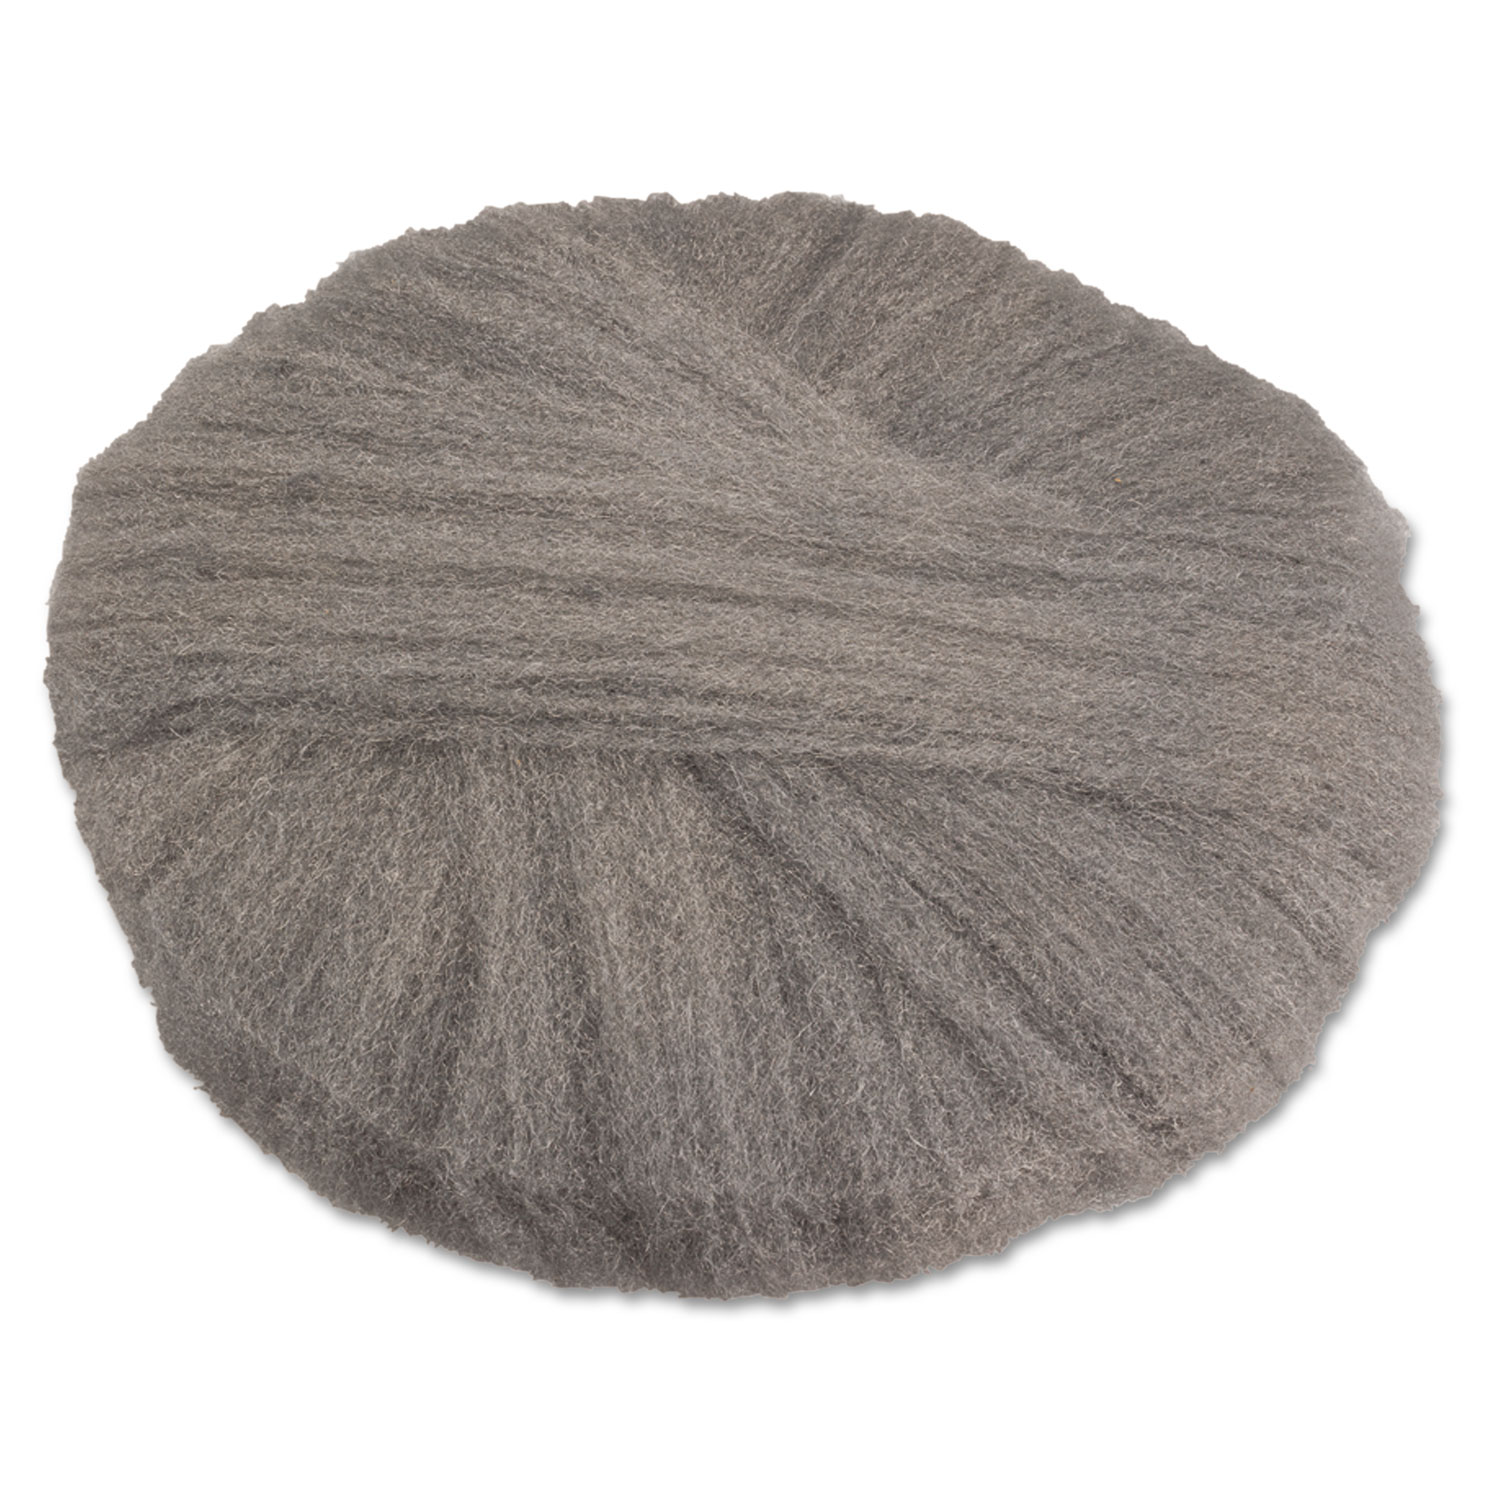  GMT 120171 Radial Steel Wool Pads, Grade 1 (Med): Cleaning & Dry Scrubbing, 17, GY, 12/CT (GMA120171) 